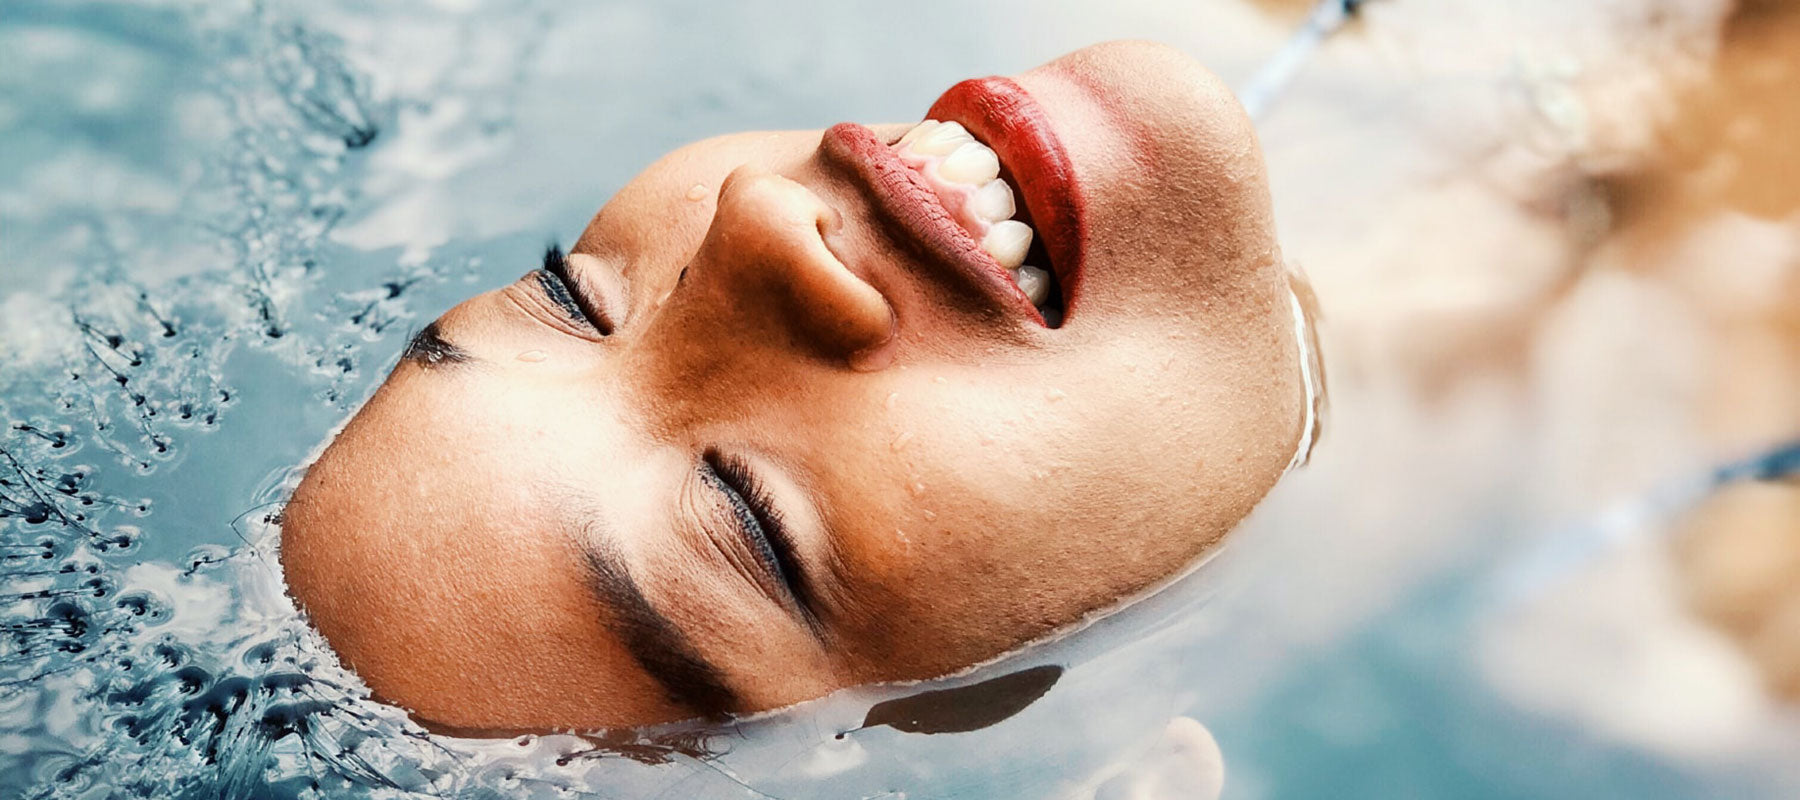 Rejuvenate Your Skin with These Top Tips